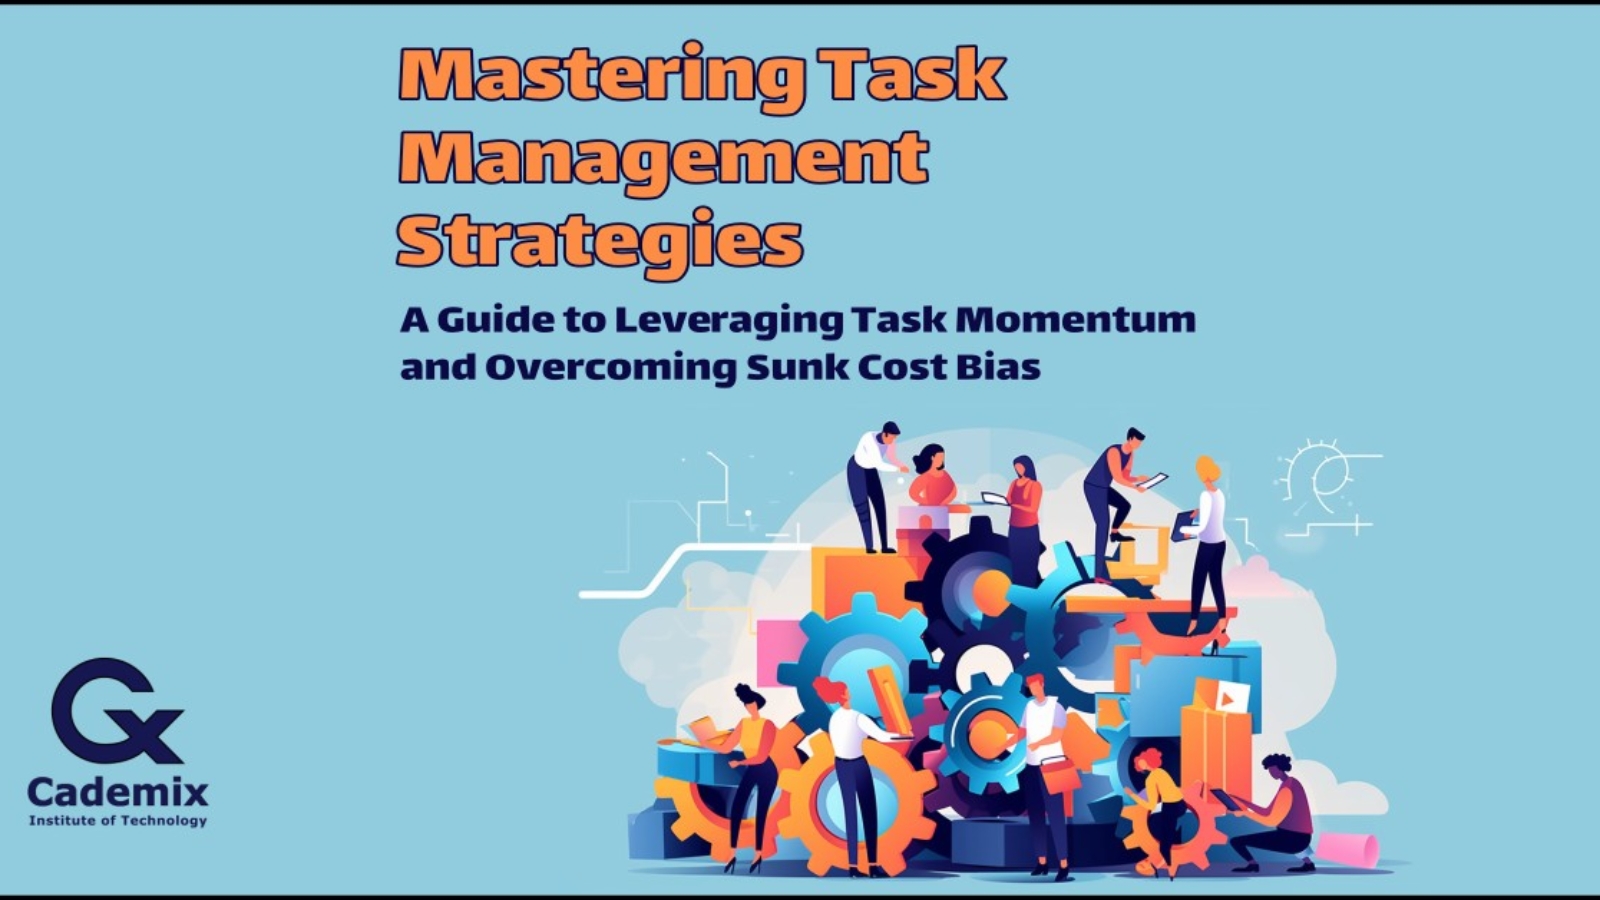 Mastering Task Management Strategies: A Guide to Leveraging Task Momentum